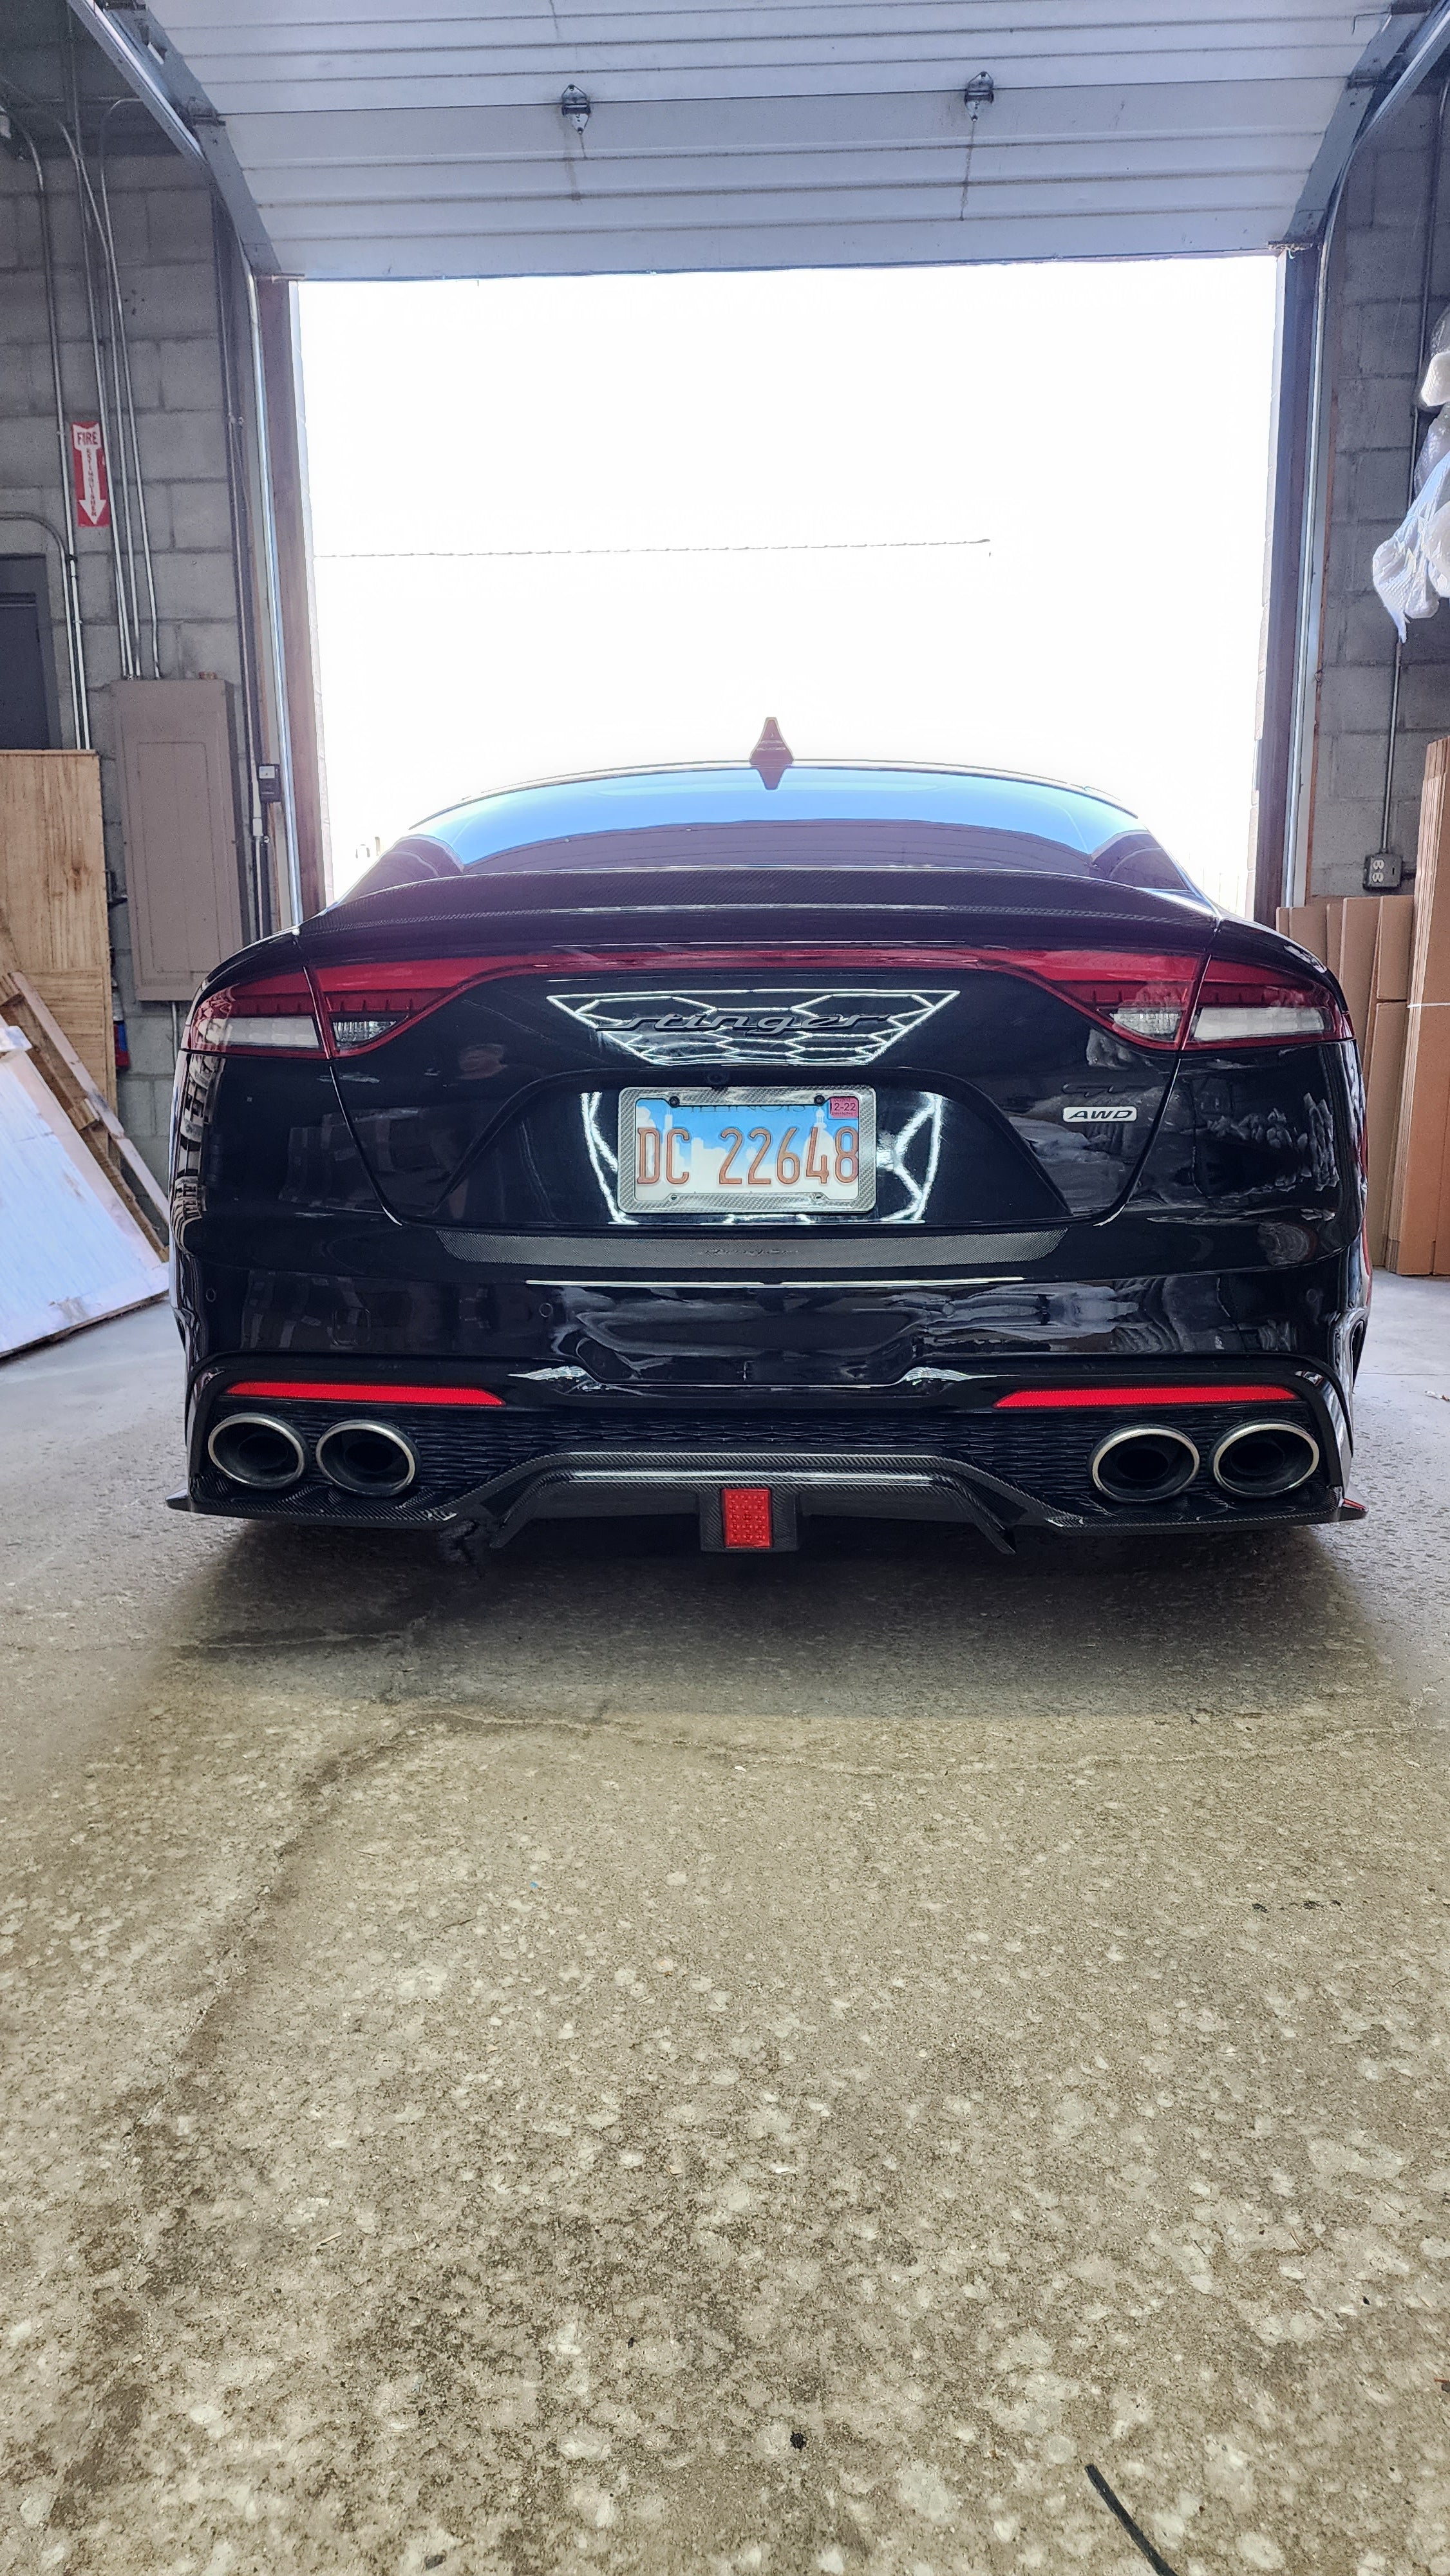 Close-up of the 2022' KIA STINGER's Carbon Fiber Diffuser, highlighting the quality carbon fiber weave and the 3rd Brake Light feature.